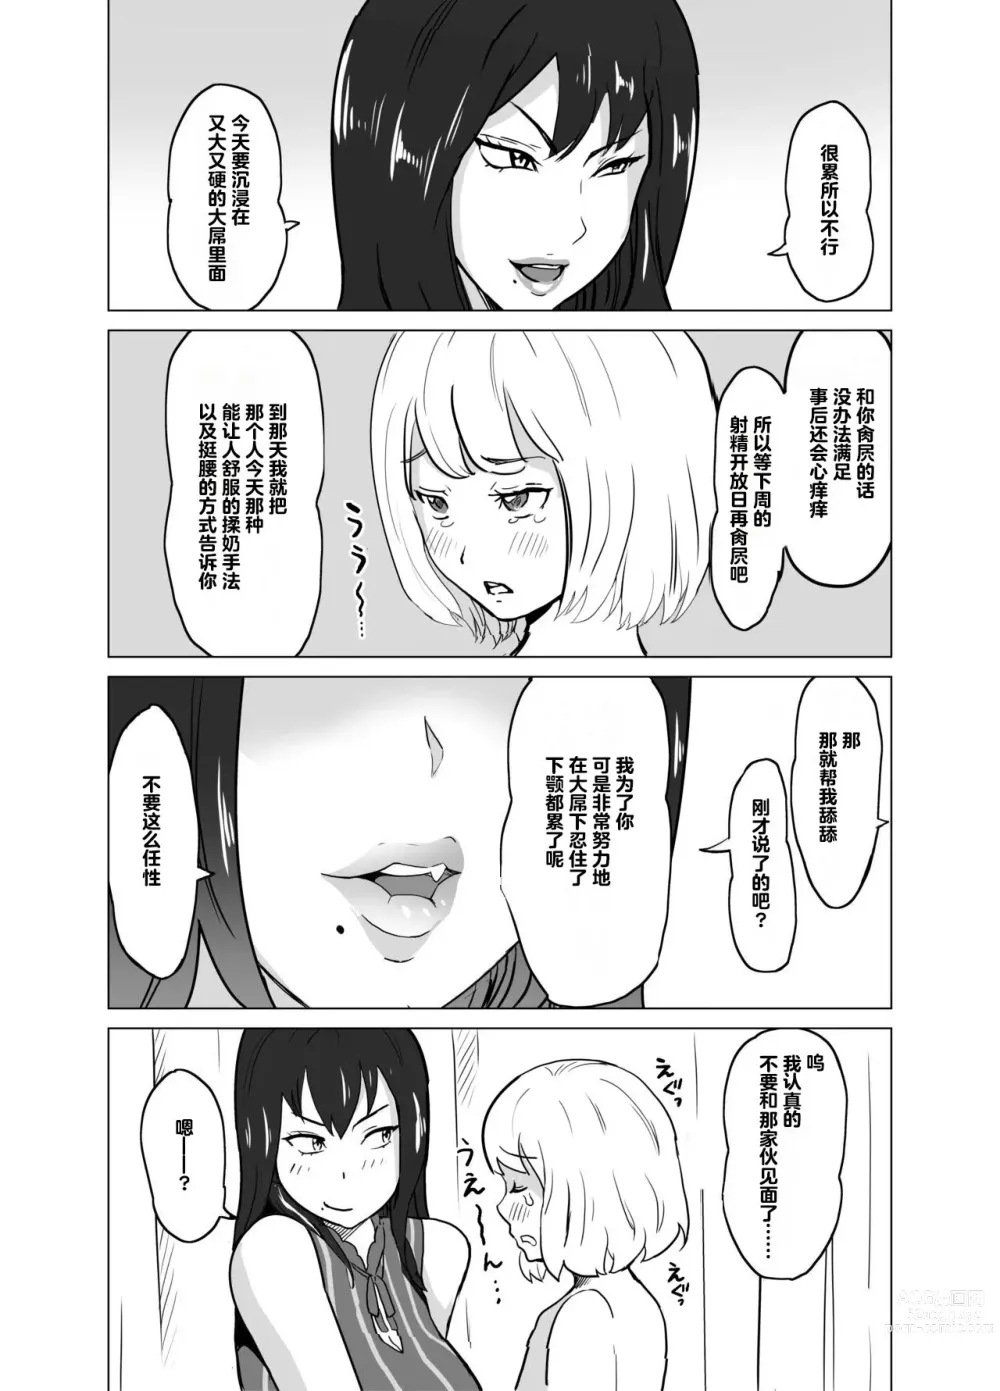 Page 27 of doujinshi older girlfriend who reports cheating while flirting love